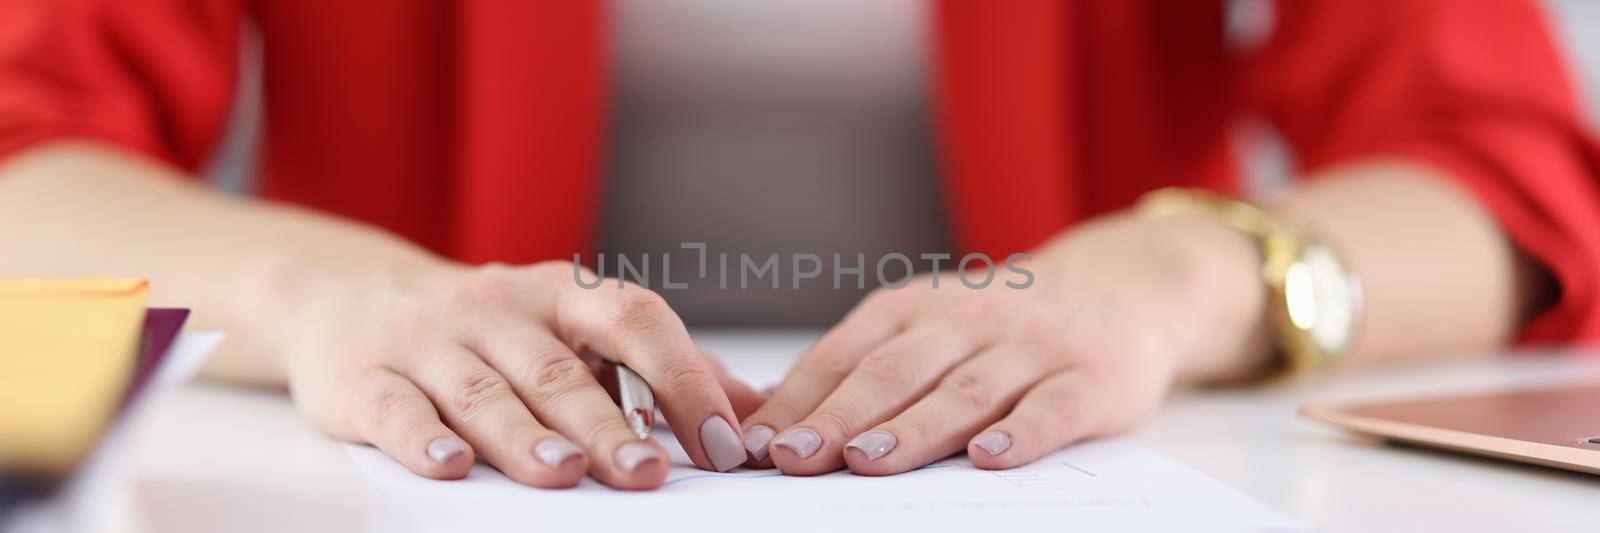 Close-up of woman hands with perfect manicure holding pen. Office manager sitting at workplace. Boss signing documents or profitable contract. Paperwork or good deal idea